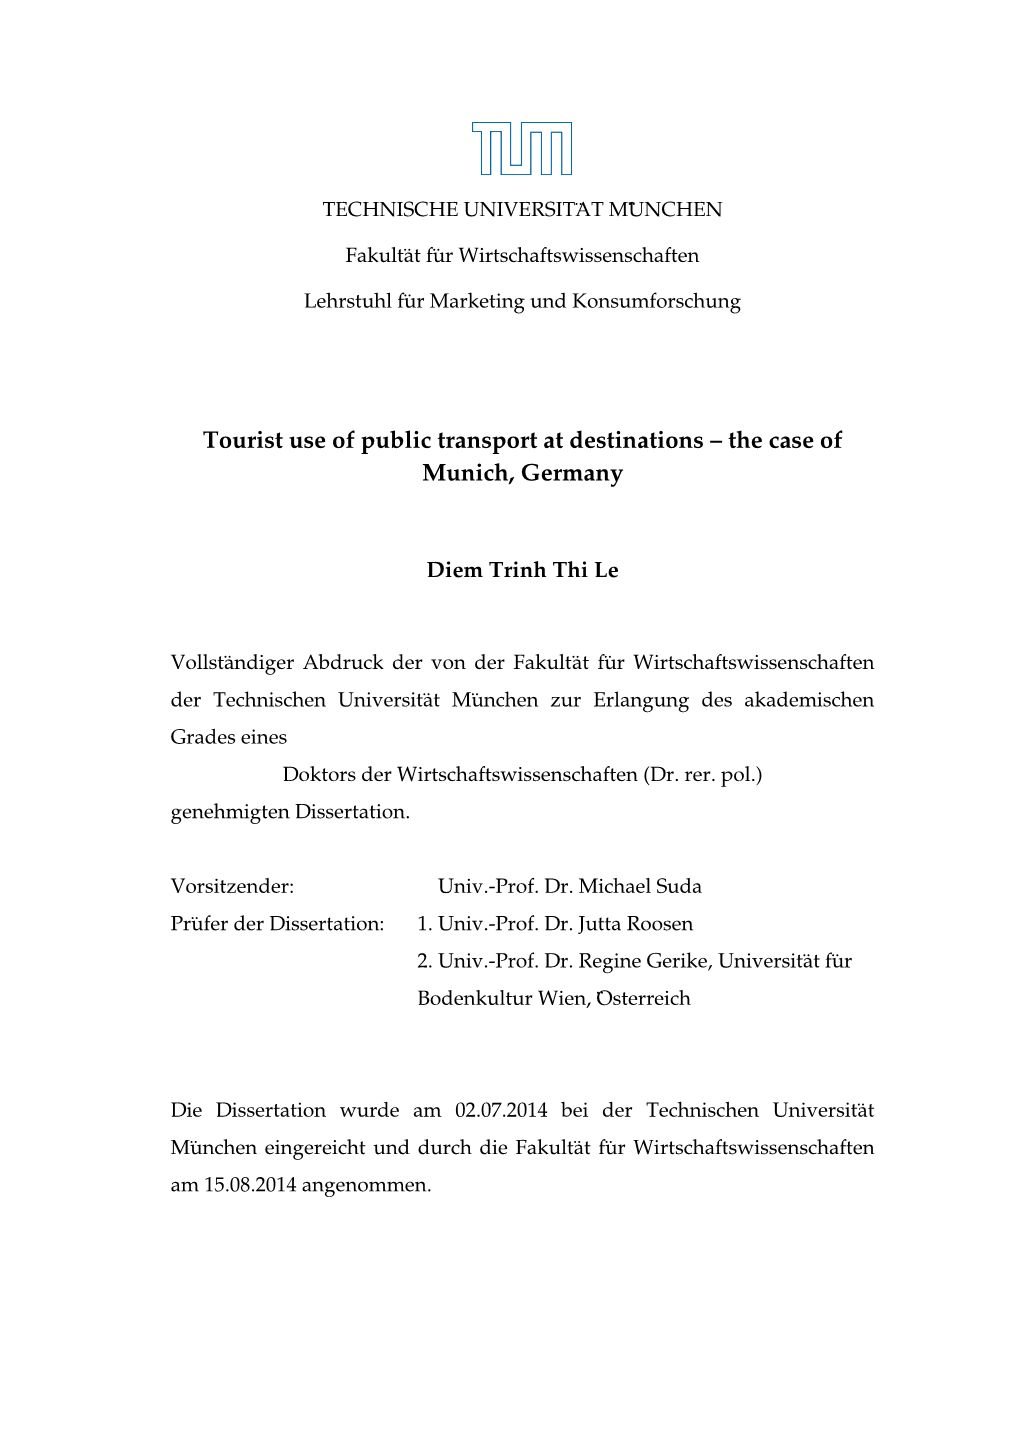 Tourist Use of Public Transport at Destinations – the Case of Munich, Germany